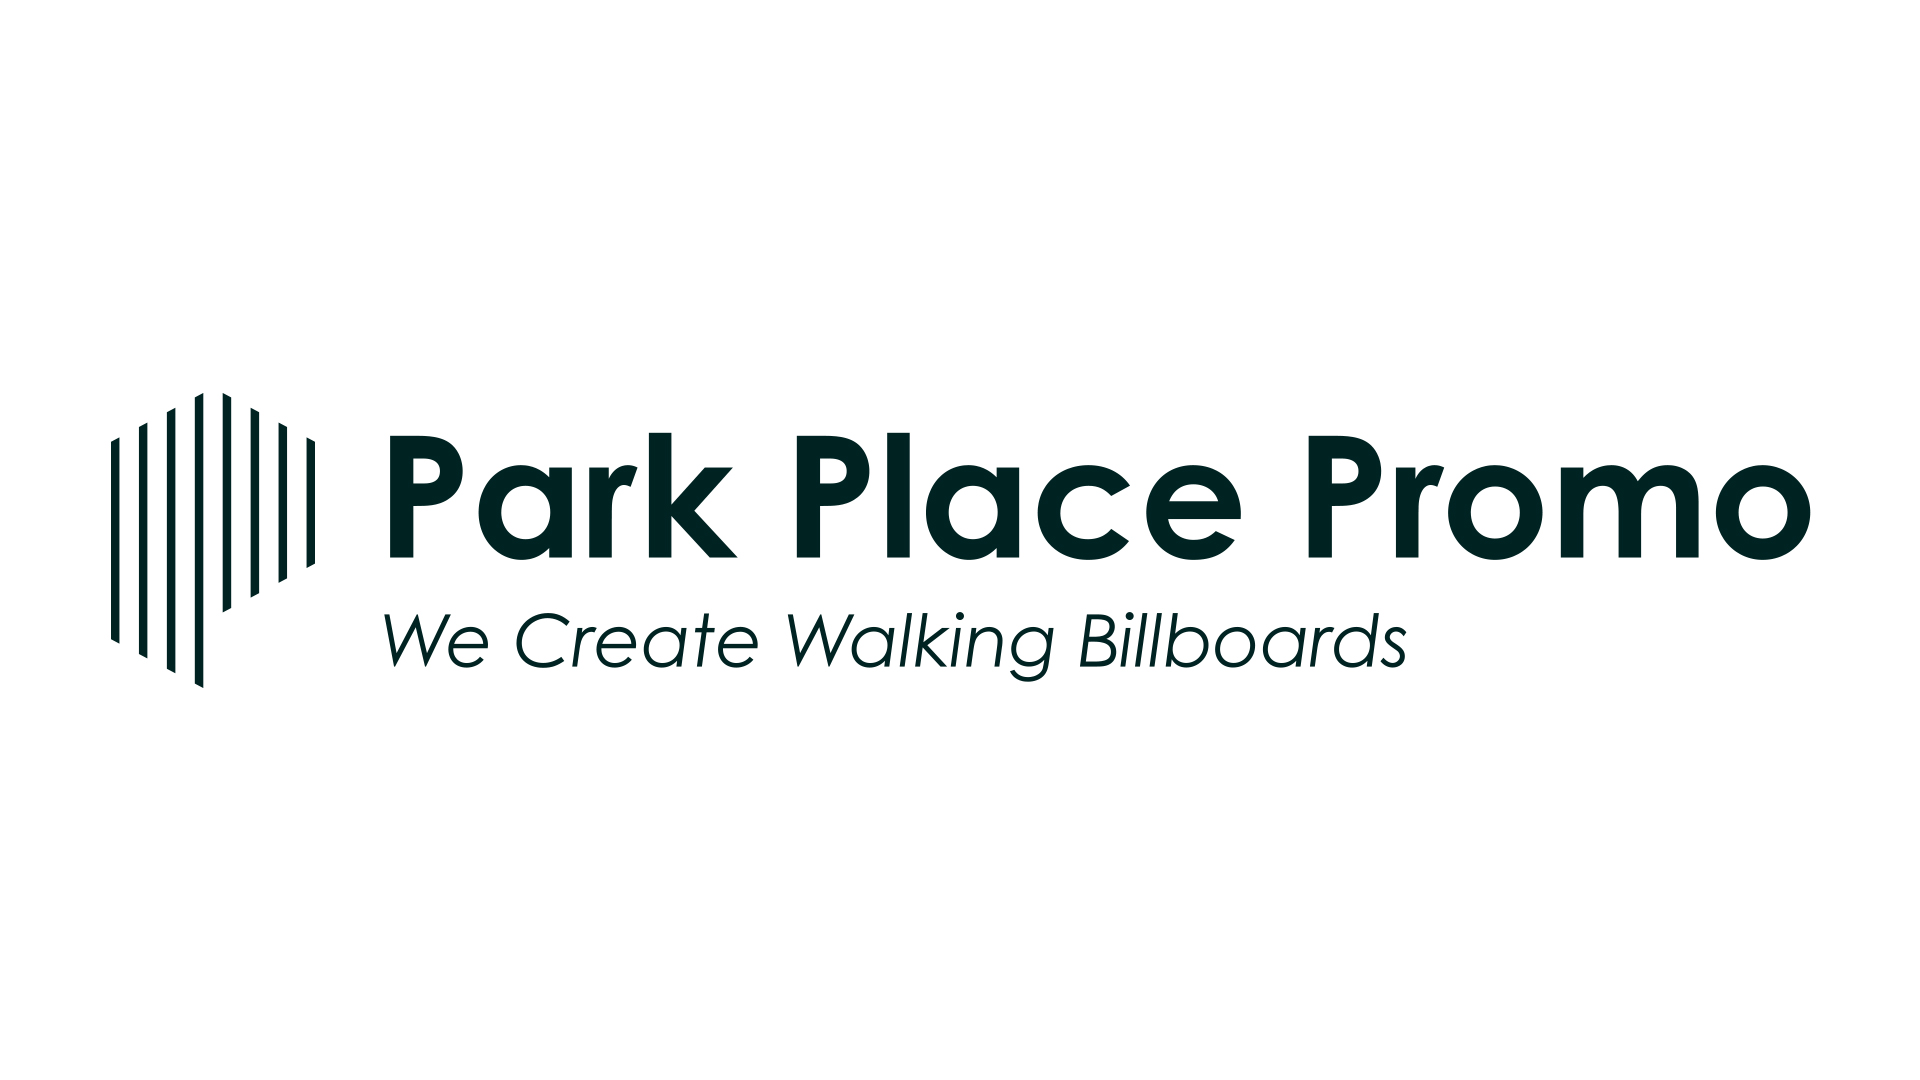 Park Place Promotional Imprints Officially Launches as Sister Company